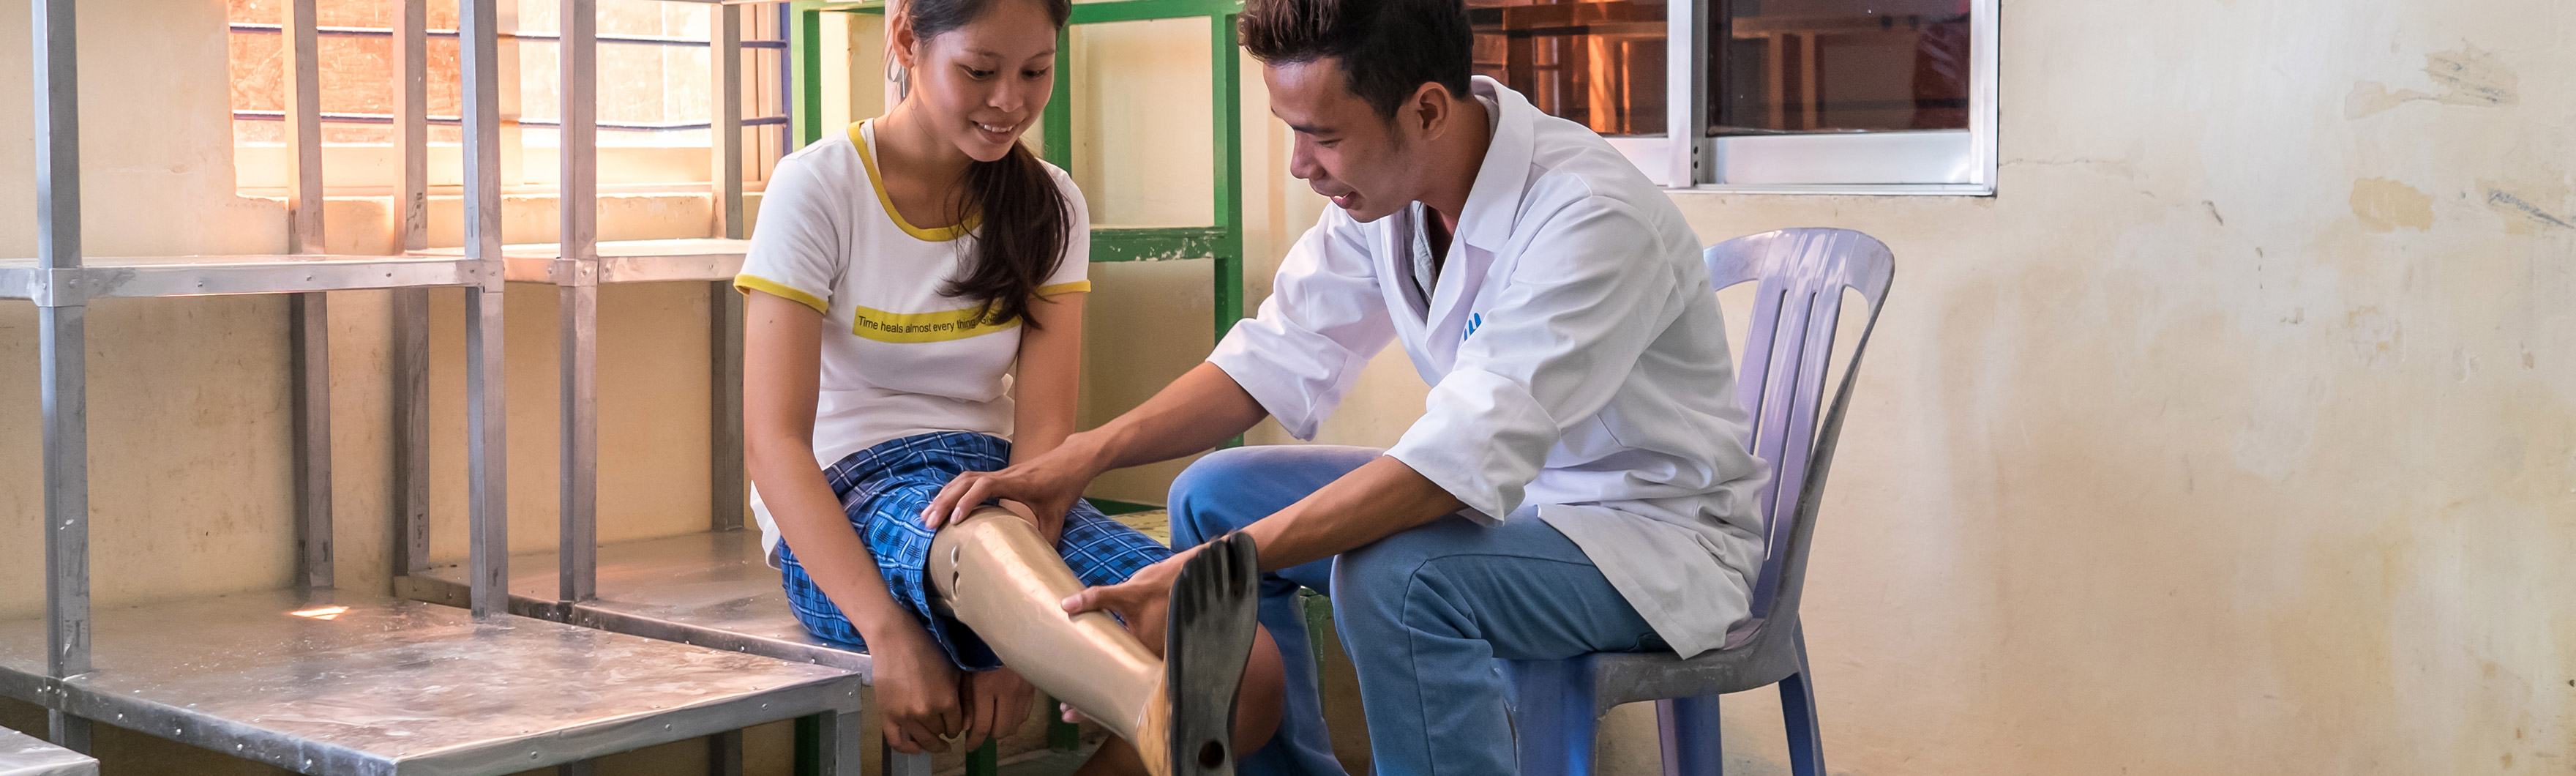 Cambodia, Kanha in rCambodia, Kanha in rehabilitation session with Vanno Leap from HI. Victim of an explosive remnant of war, Kanha was fitted with a prosthesis at Kampong Cham centre, where she returns for her follow-up.ehabilitation session with Vanno L